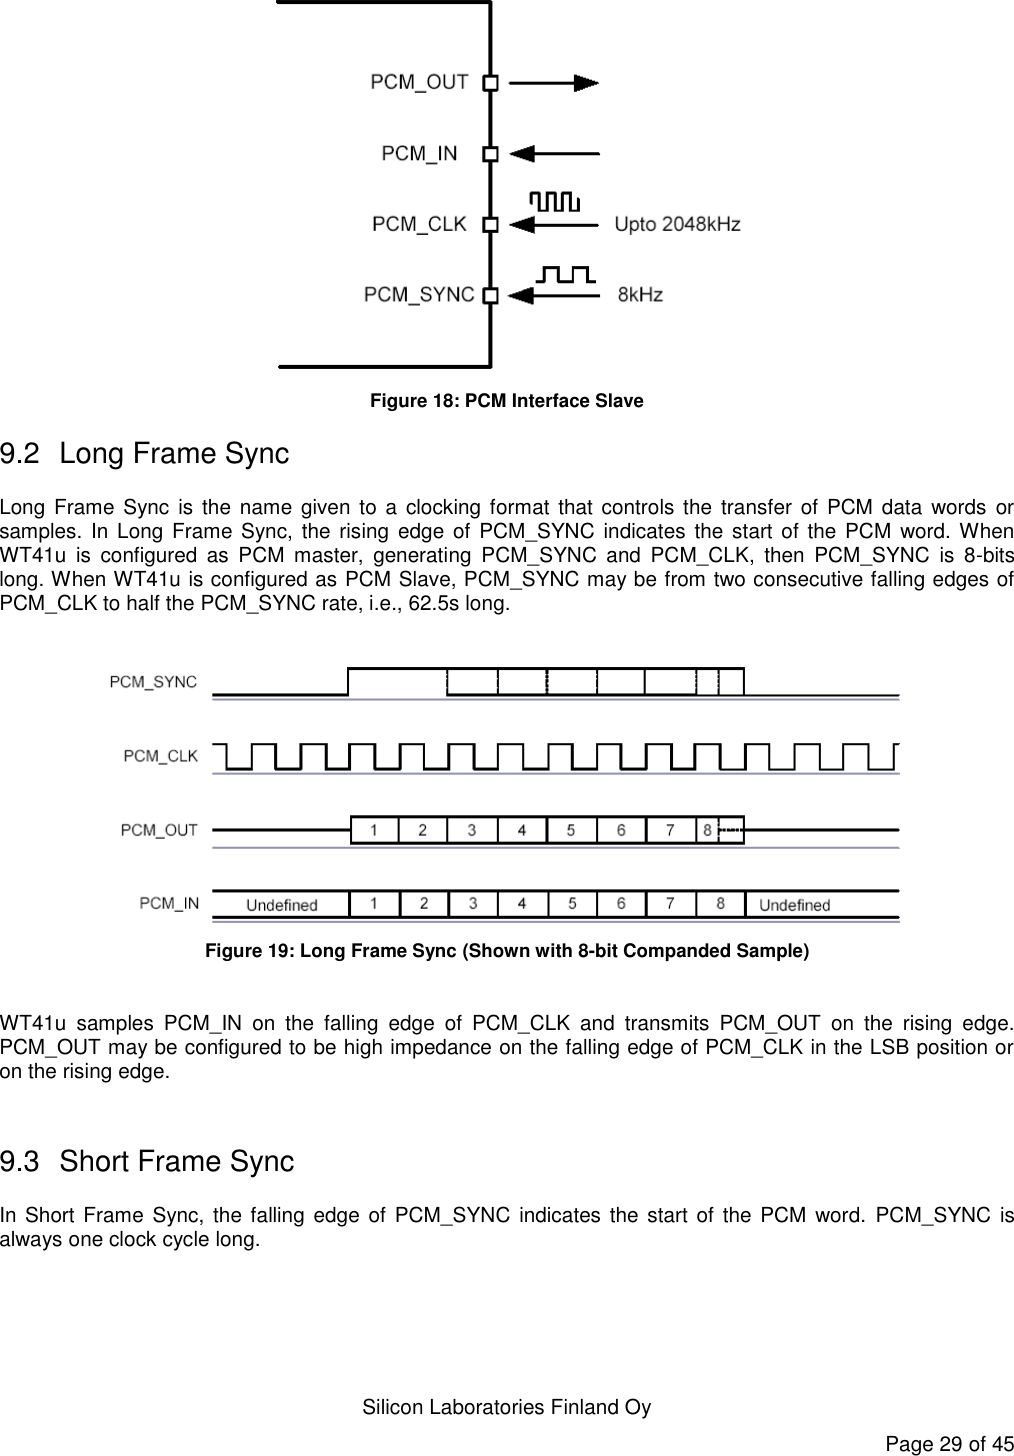   Silicon Laboratories Finland Oy Page 29 of 45  Figure 18: PCM Interface Slave 9.2  Long Frame Sync Long Frame Sync  is  the name given  to a  clocking format that controls  the transfer  of PCM  data  words  or samples. In Long Frame Sync, the rising edge  of PCM_SYNC indicates  the  start of the  PCM word. When WT41u  is  configured  as  PCM  master,  generating  PCM_SYNC  and  PCM_CLK,  then  PCM_SYNC  is  8-bits long. When WT41u is configured as PCM Slave, PCM_SYNC may be from two consecutive falling edges of PCM_CLK to half the PCM_SYNC rate, i.e., 62.5s long.   Figure 19: Long Frame Sync (Shown with 8-bit Companded Sample)  WT41u  samples  PCM_IN  on  the  falling  edge  of  PCM_CLK  and  transmits  PCM_OUT  on  the  rising  edge. PCM_OUT may be configured to be high impedance on the falling edge of PCM_CLK in the LSB position or on the rising edge.  9.3  Short Frame Sync In Short  Frame Sync, the falling edge  of  PCM_SYNC indicates the start of  the  PCM  word.  PCM_SYNC is always one clock cycle long. 